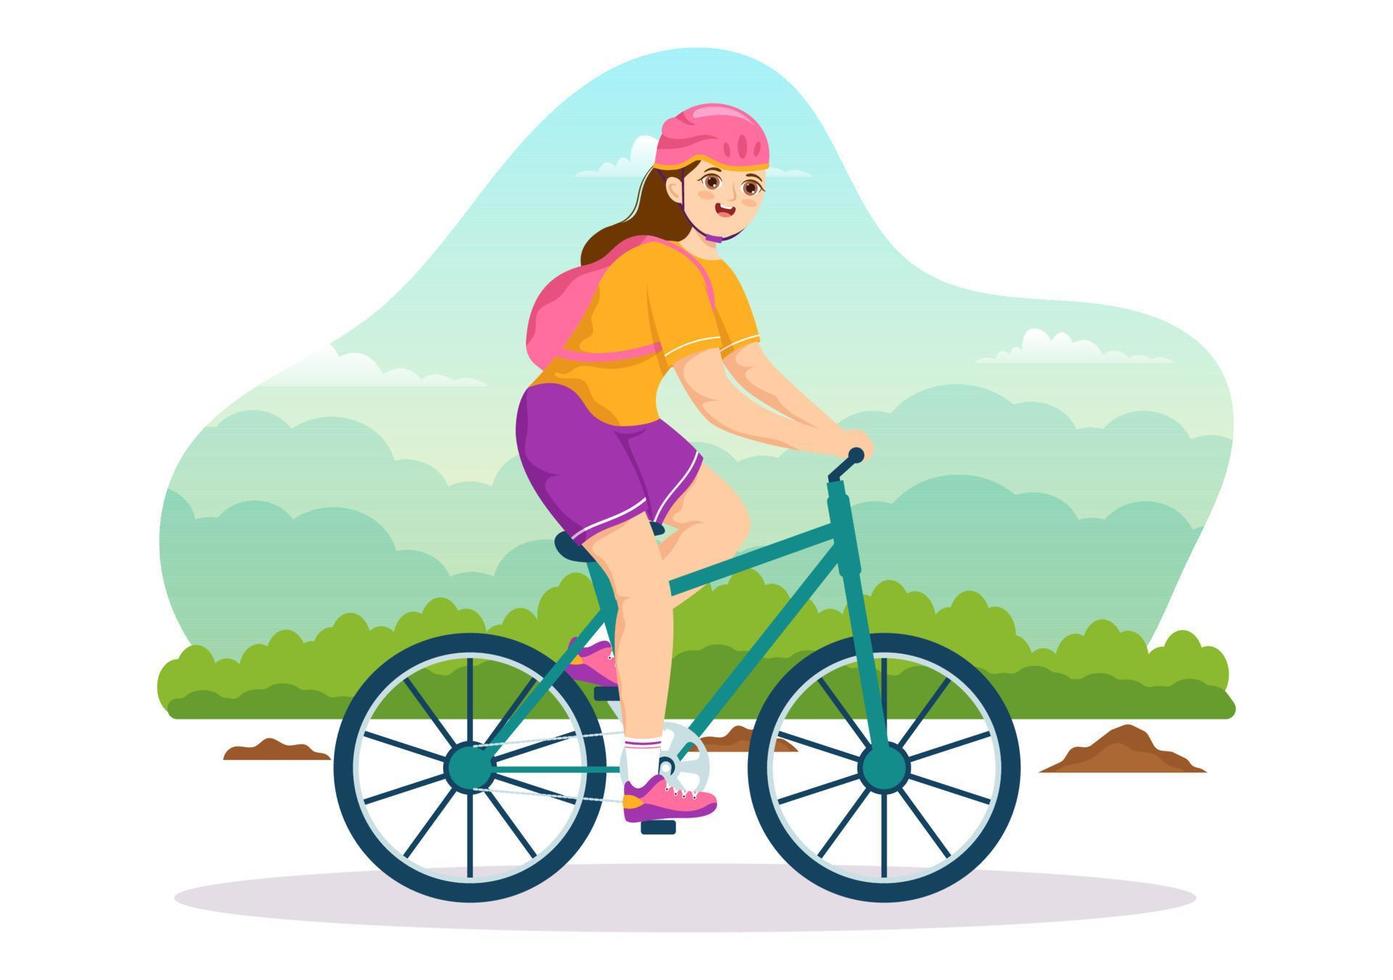 Mountain Biking Illustration with Cycling Down the Mountains for Sports, Leisure and Healthy Lifestyle in Flat Cartoon Hand Drawn Templates vector